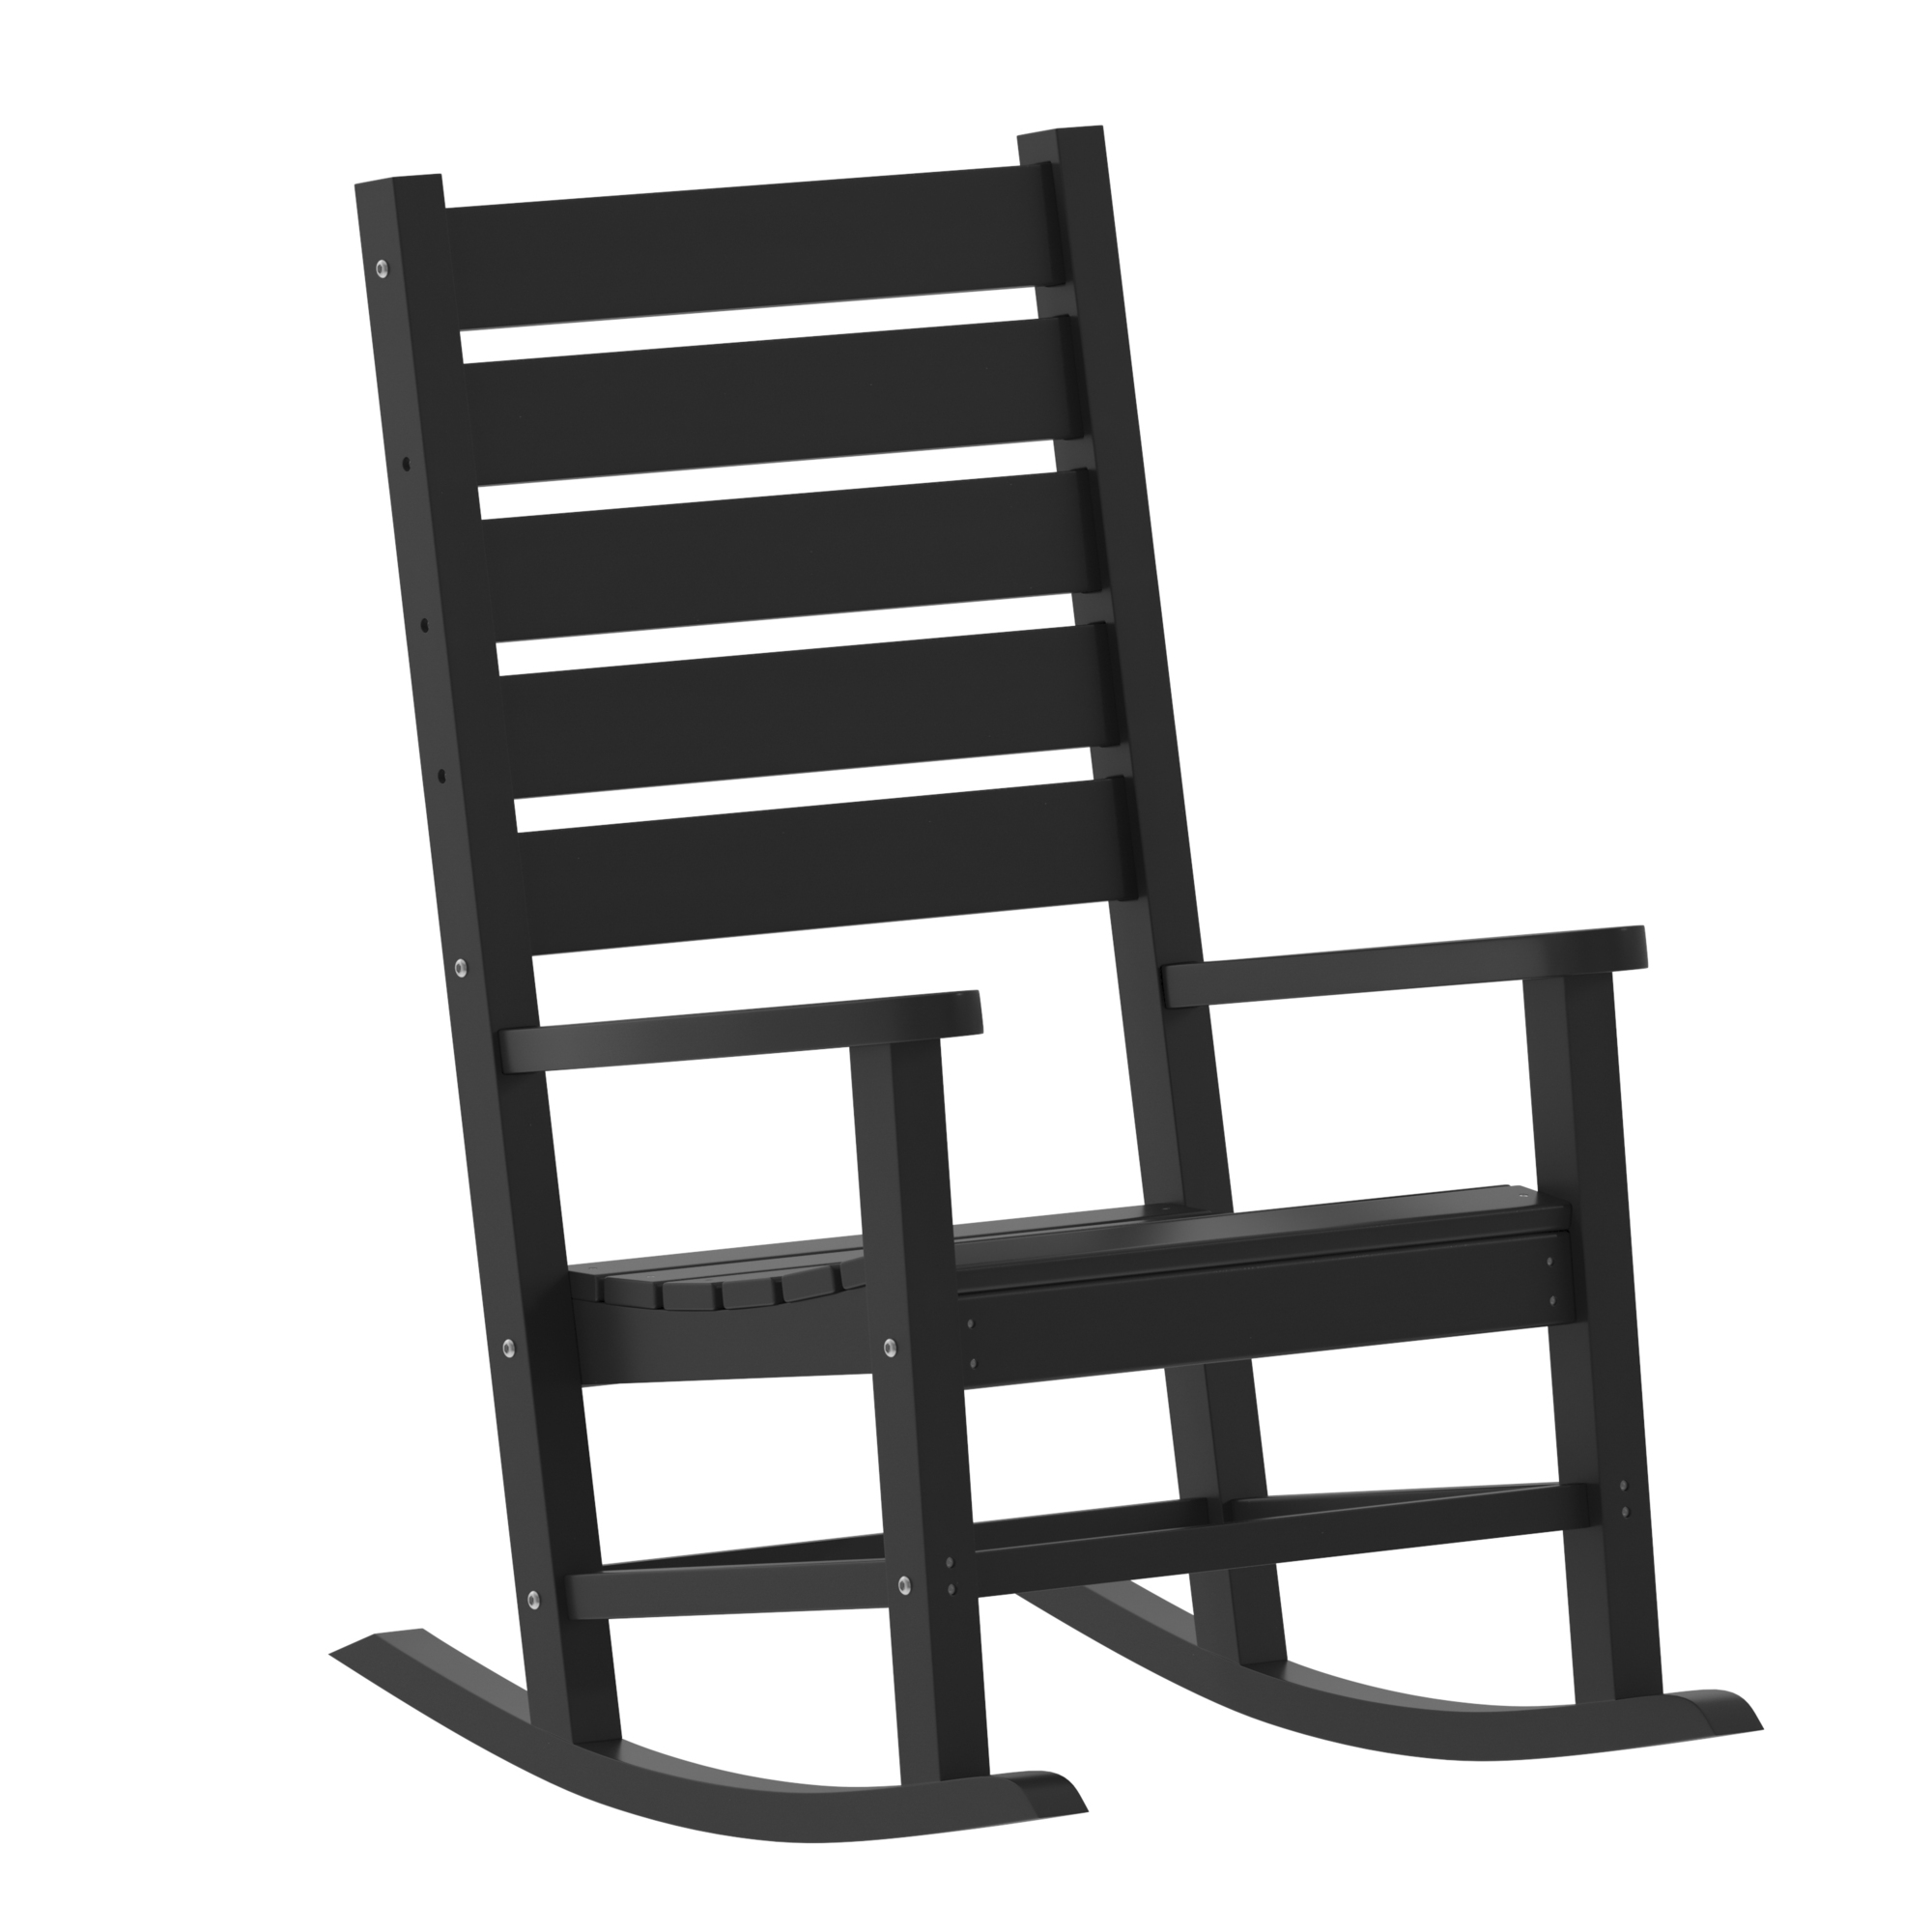 Flash Furniture, Black All-Weather Classic Outdoor Rocking Chair, Primary Color Black, Material HDPE, Width 26.5 in, Model LEHMP2002110BK